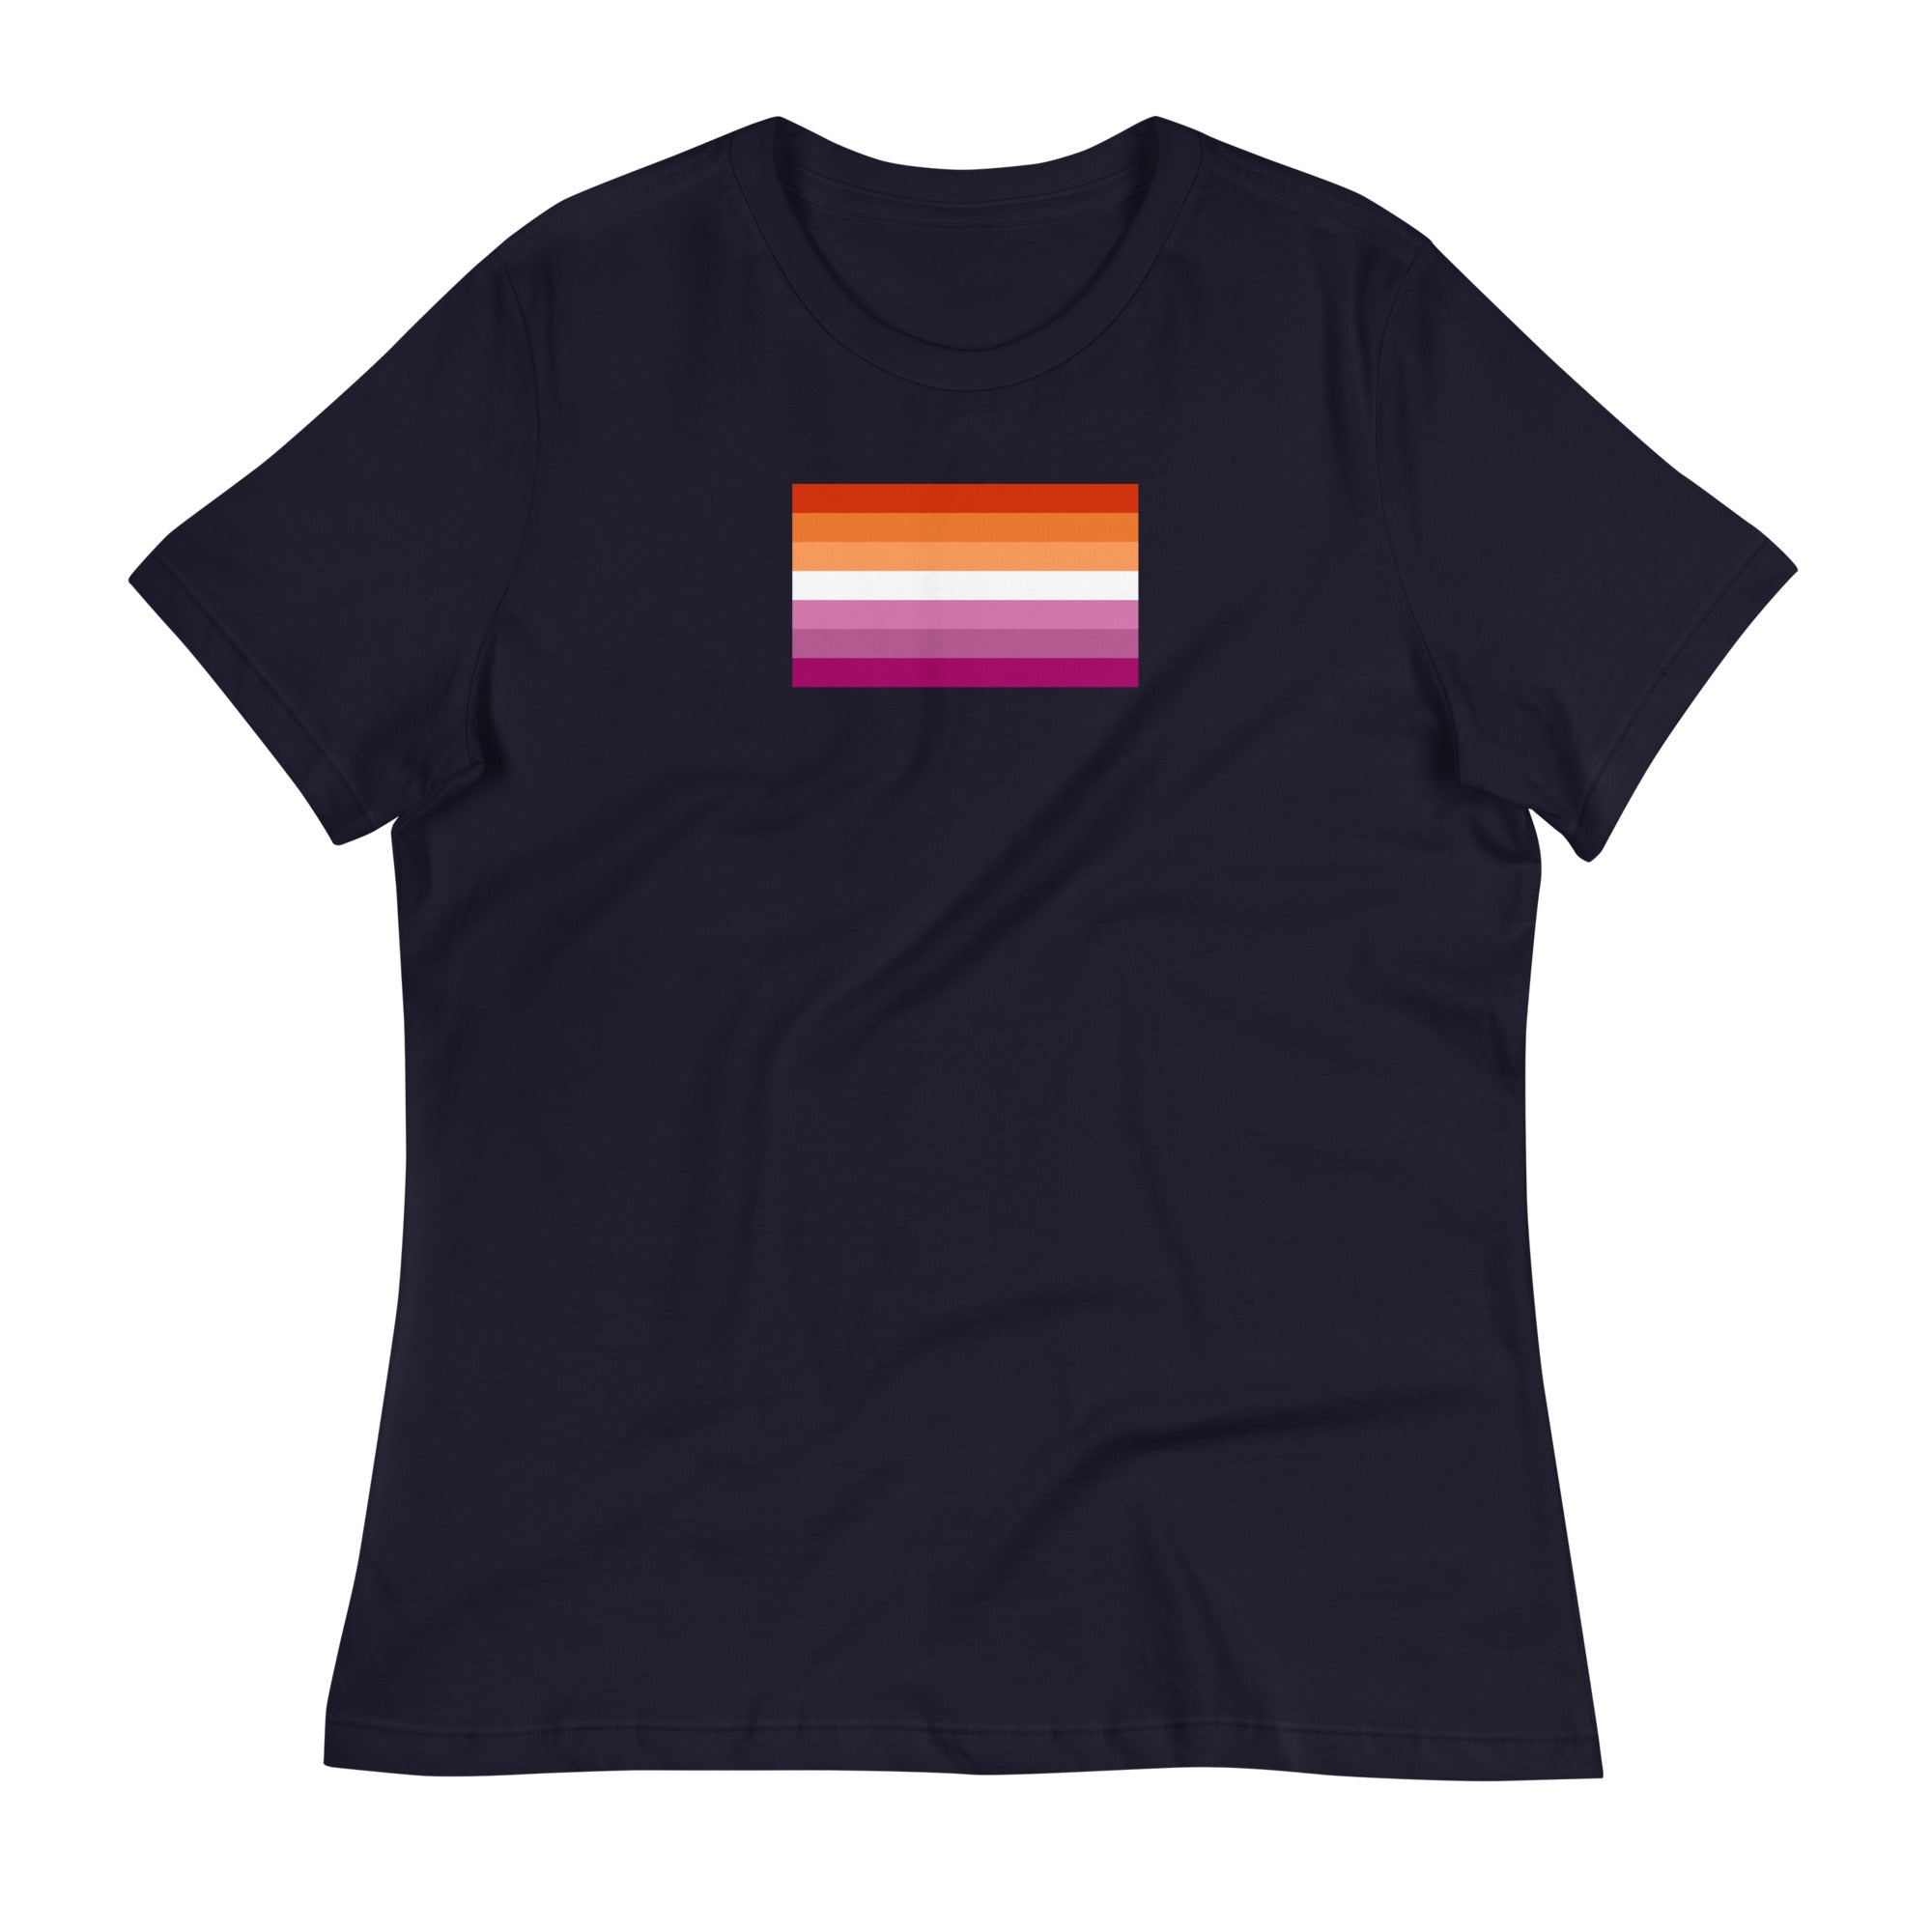 Women's Relaxed Fit T-Shirt With Sunset Lesbian Pride Flag (2019)